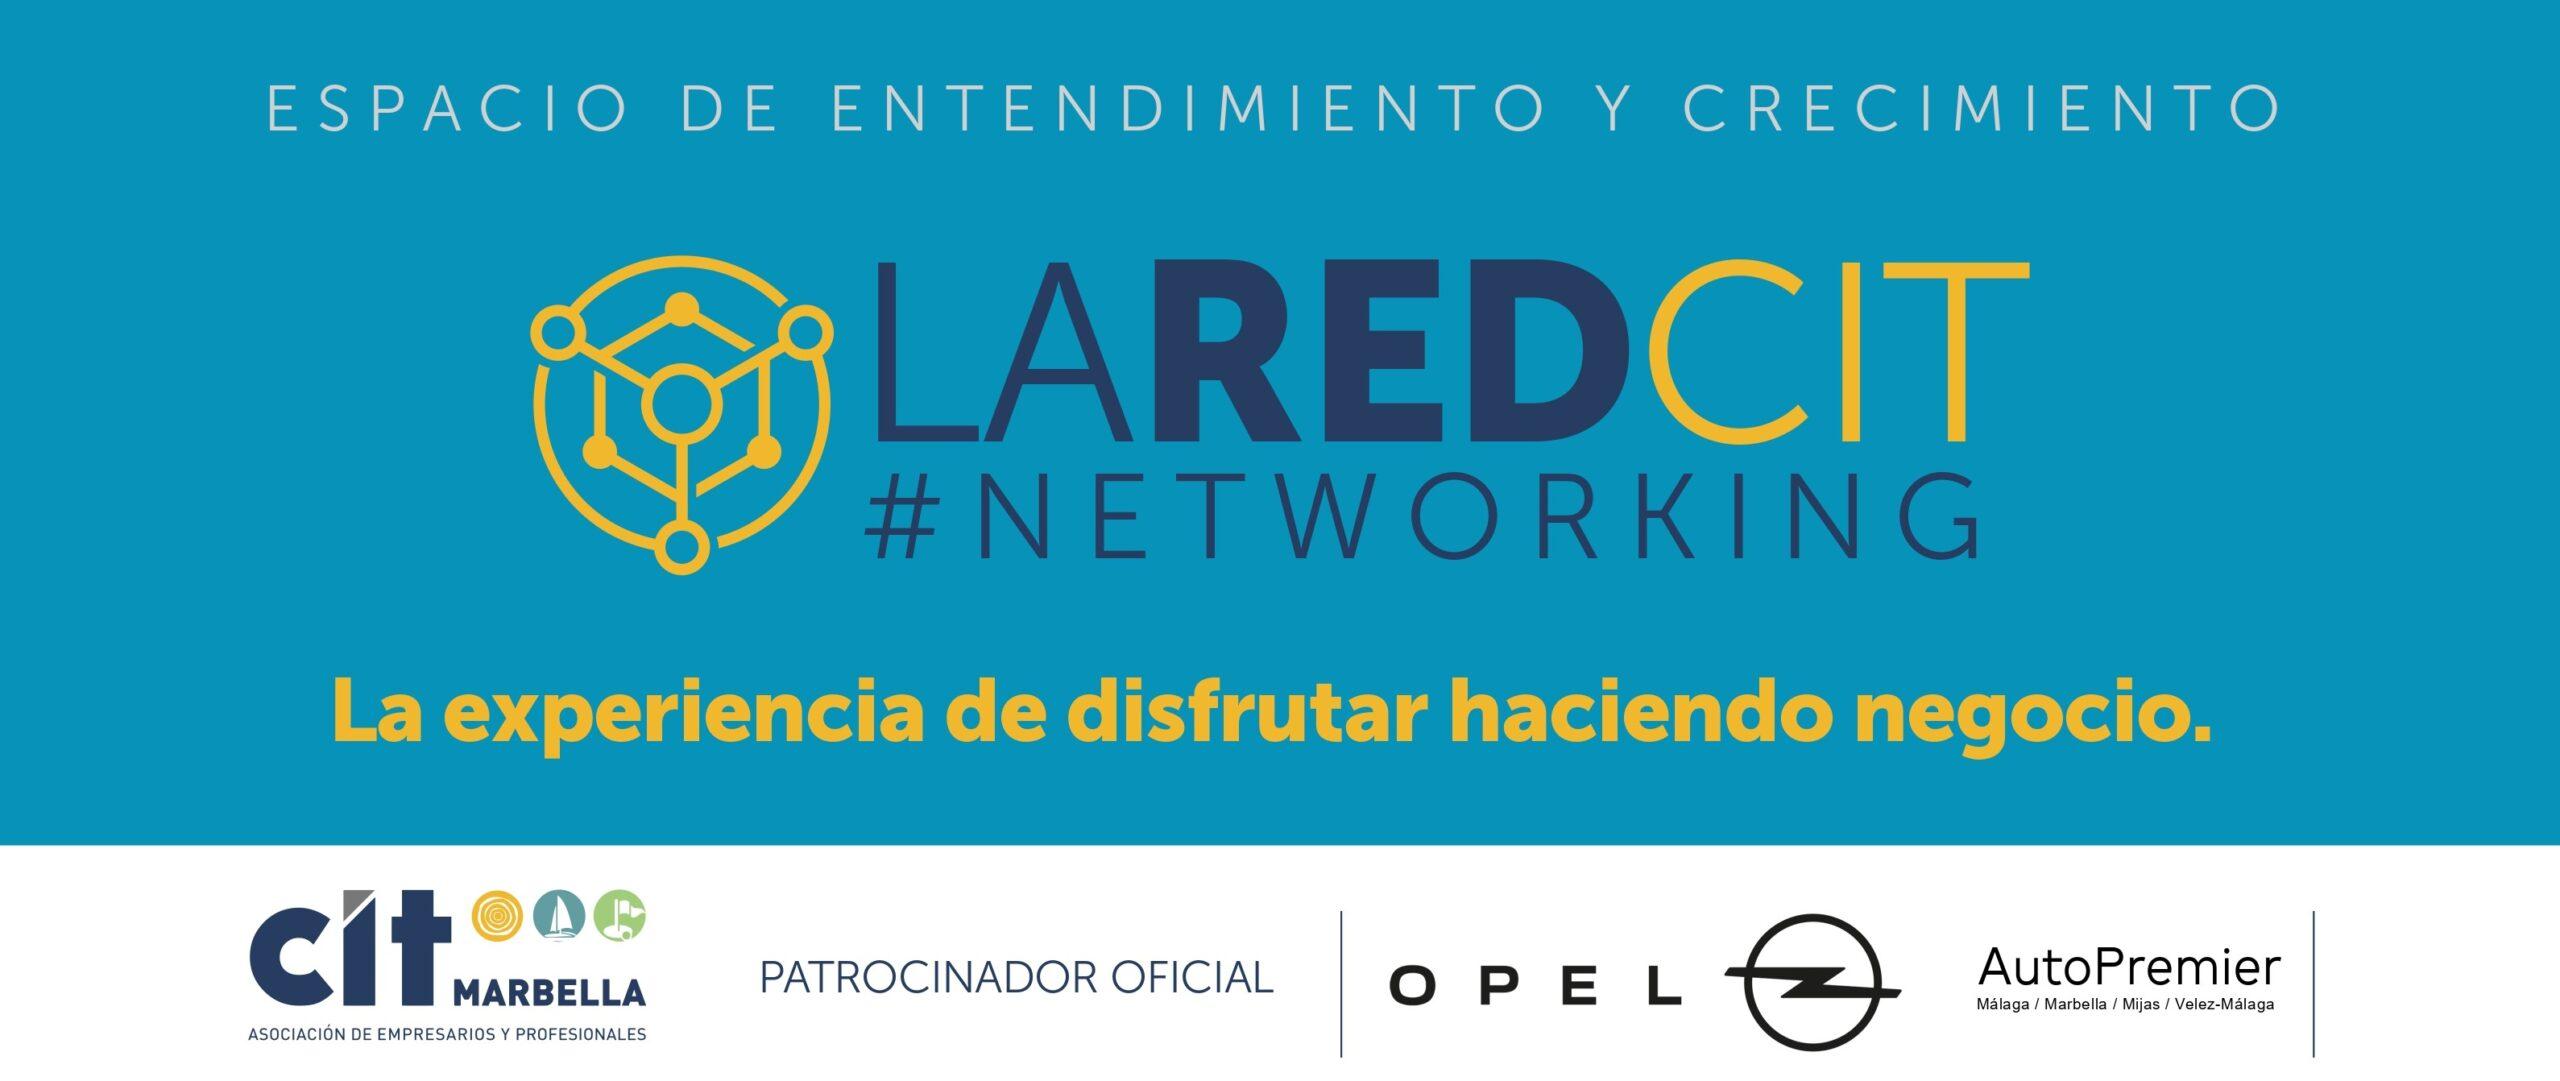 LA RED CIT #NETWORKING/THE FLAG